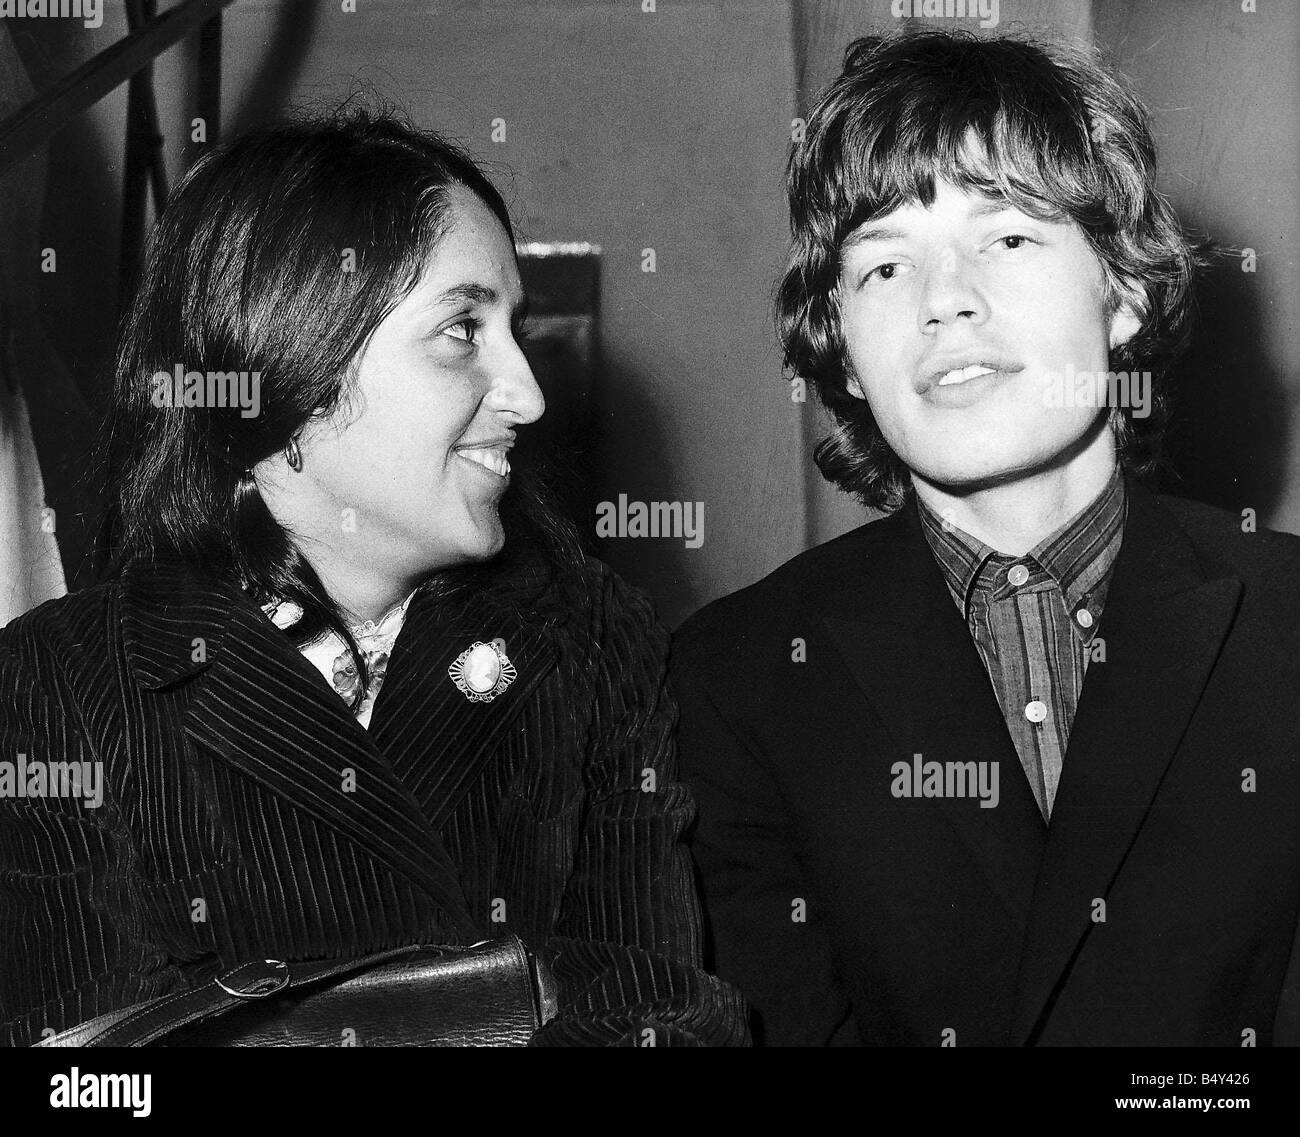 Joan Baez American folk singer famous for protest songs anti Vietnam war  meets Mick Jagger Pop Singer of the Rolling Stones in Glasgow in 1965 Stock  Photo - Alamy